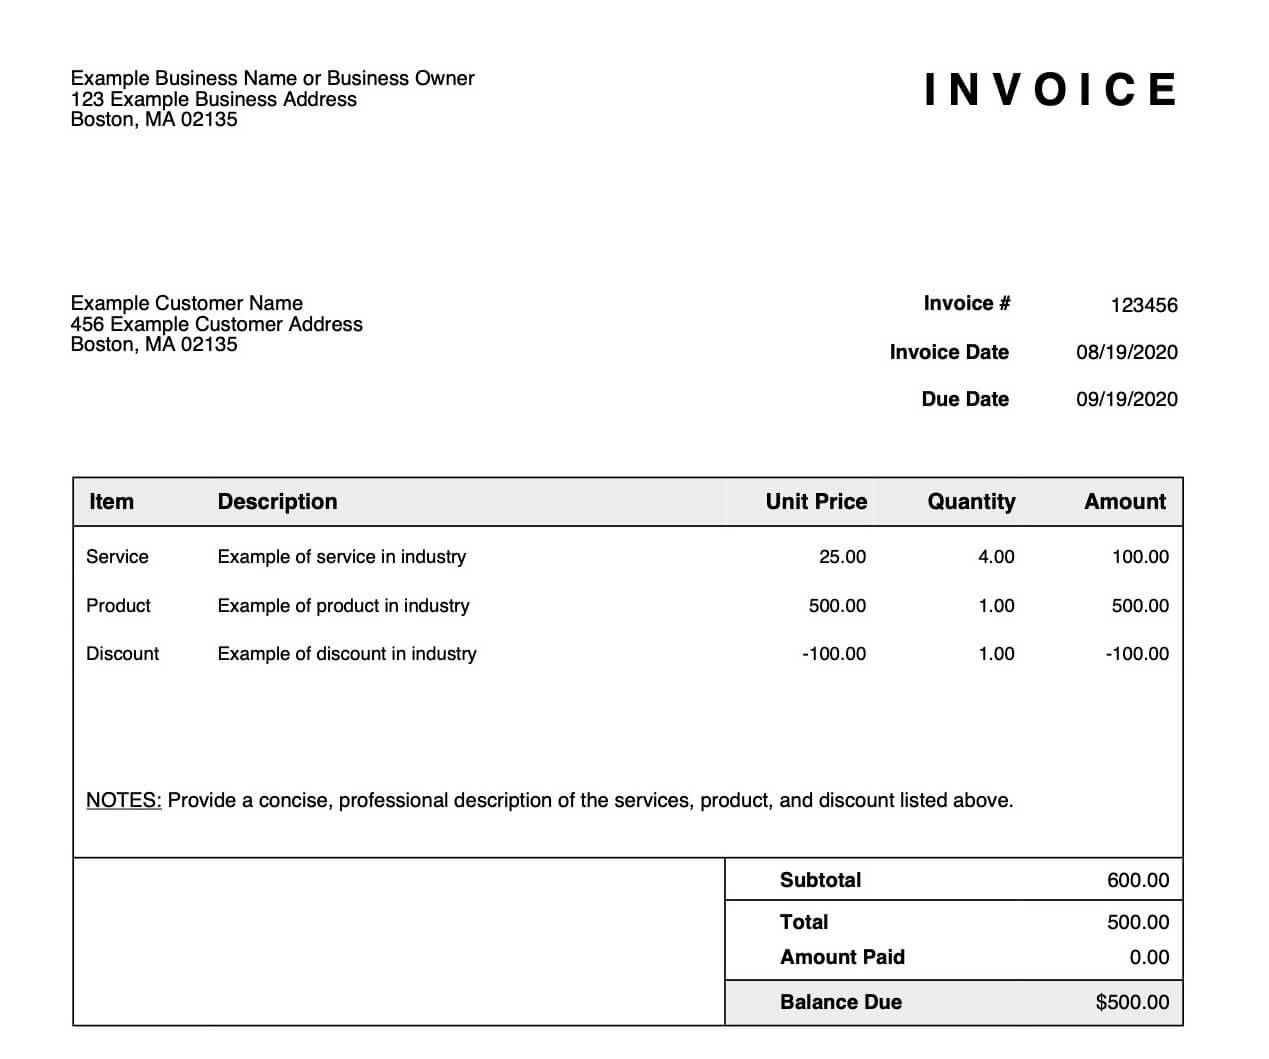 Complete Guide to Invoices